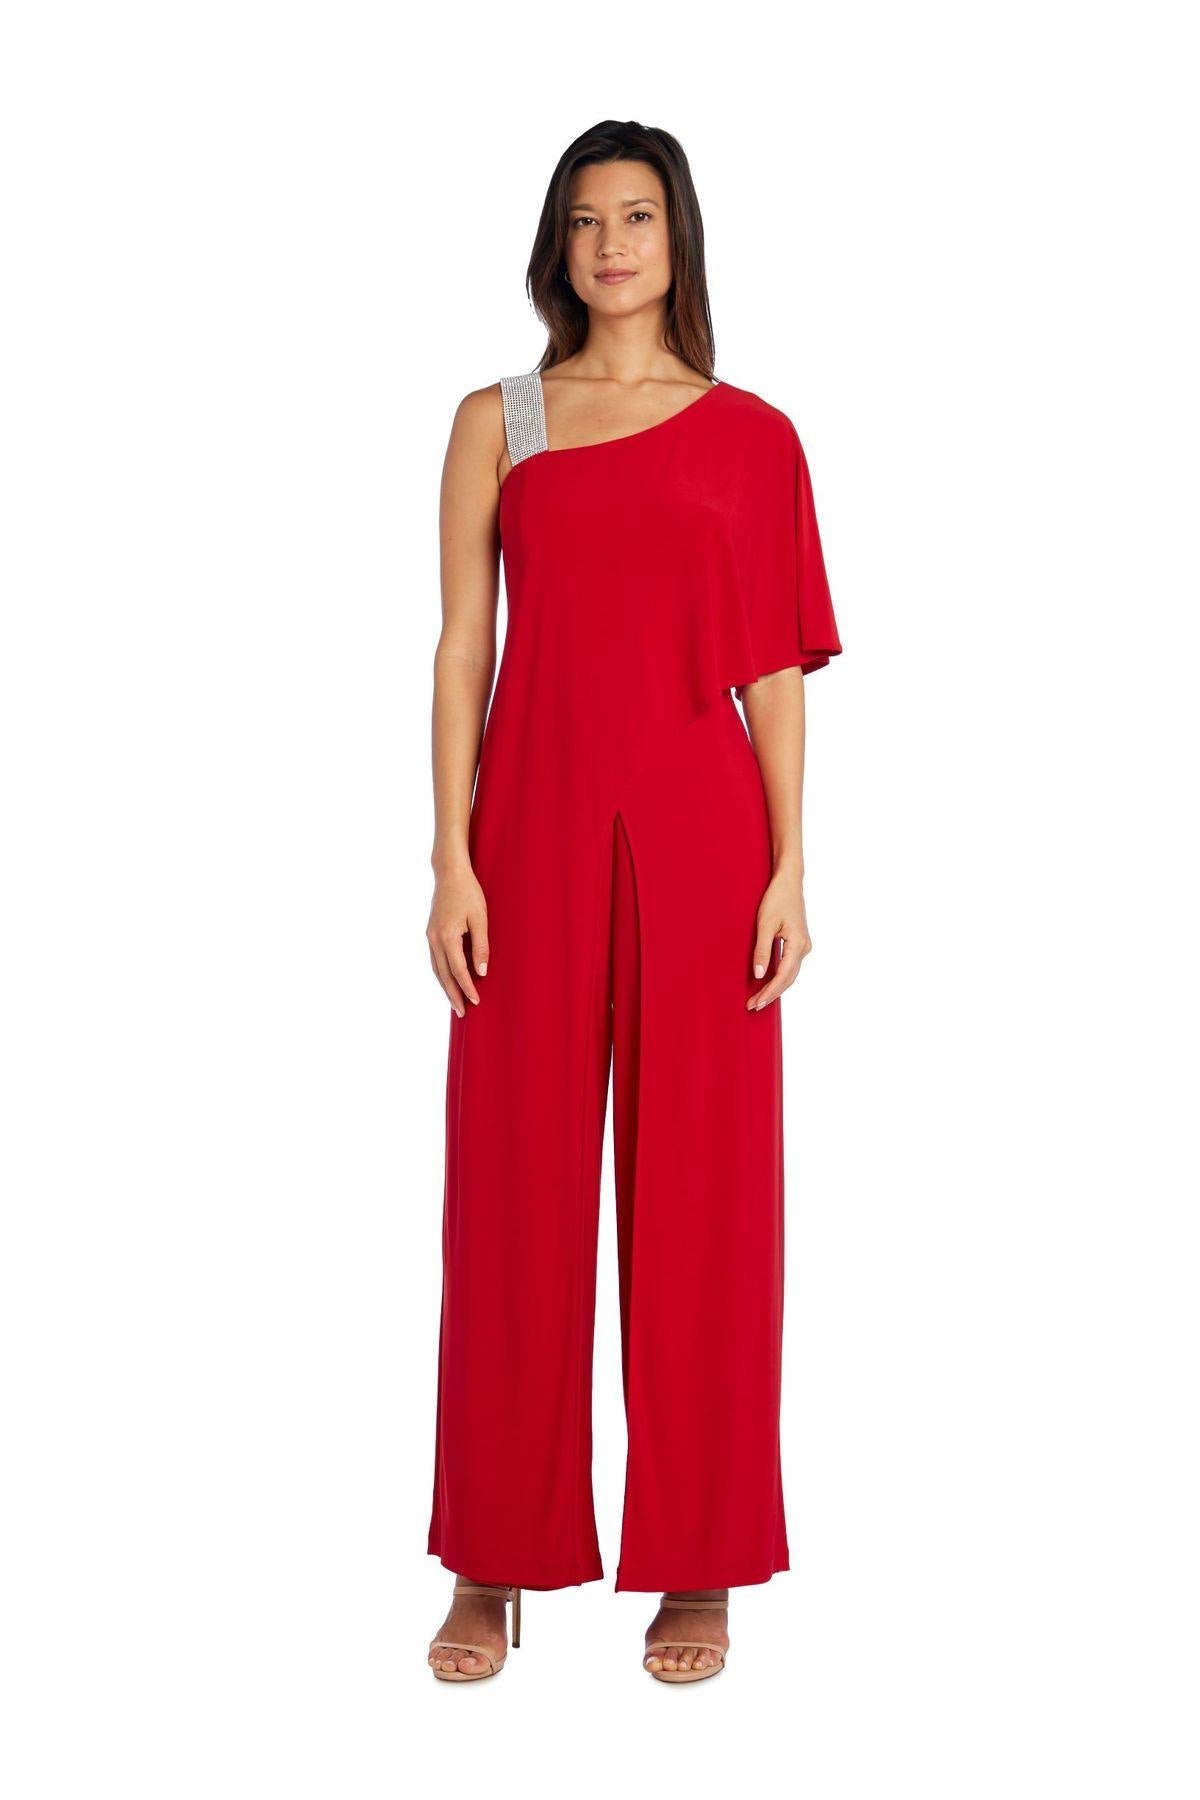 R&M Richards Asymmetric Jumpsuit with Overlay 3420 - The Dress Outlet